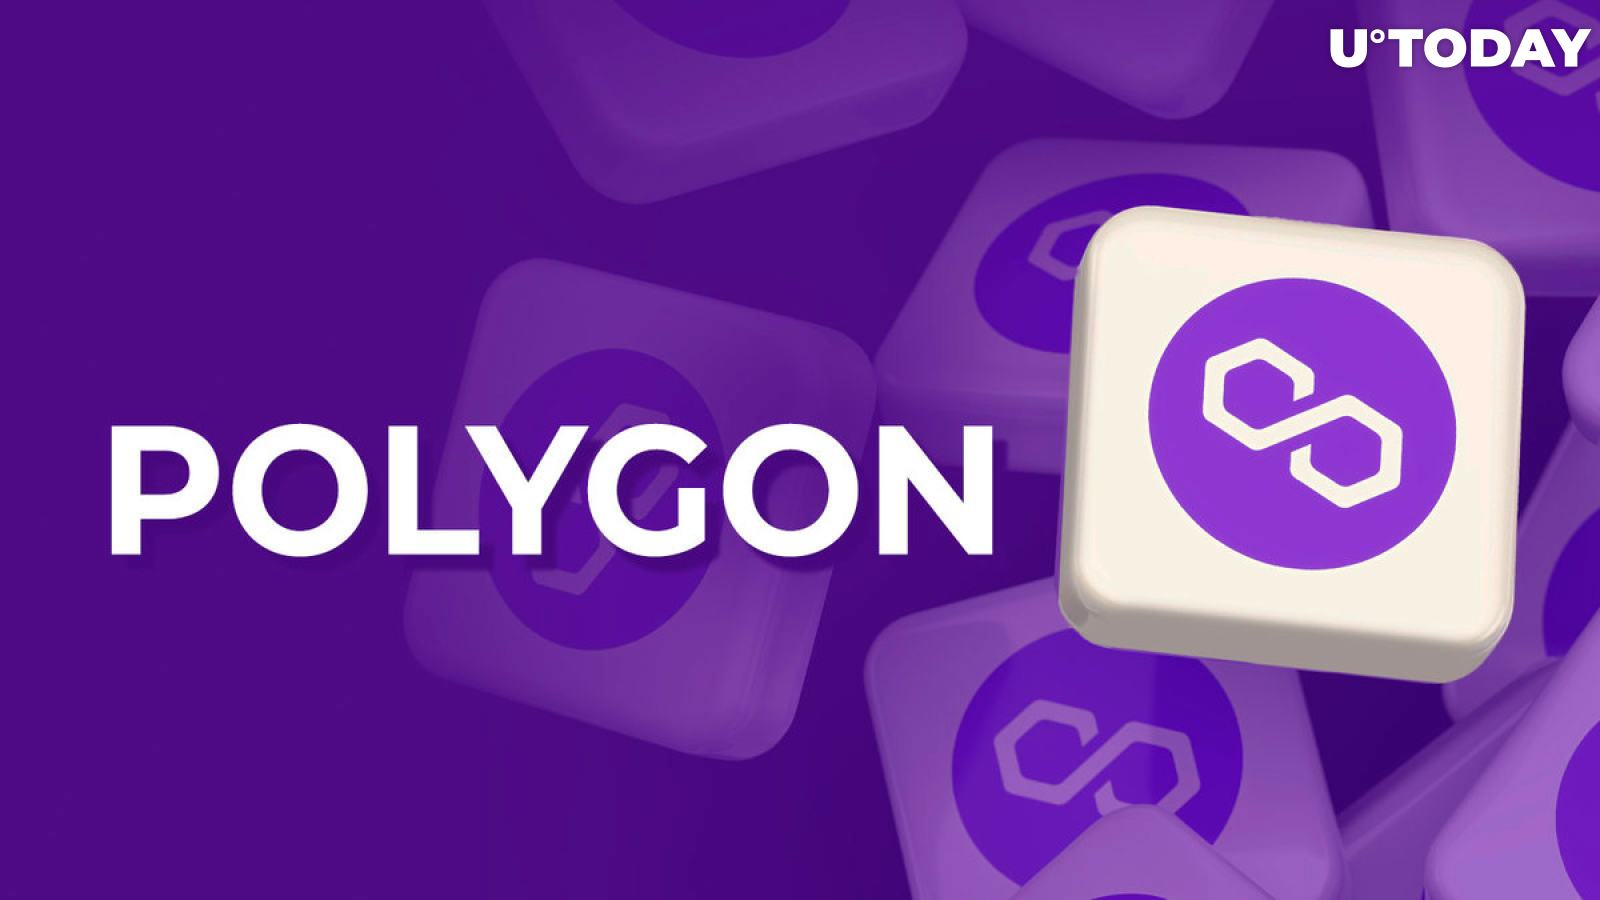 Polygon Makes Major Move to Expand Its Developer Community